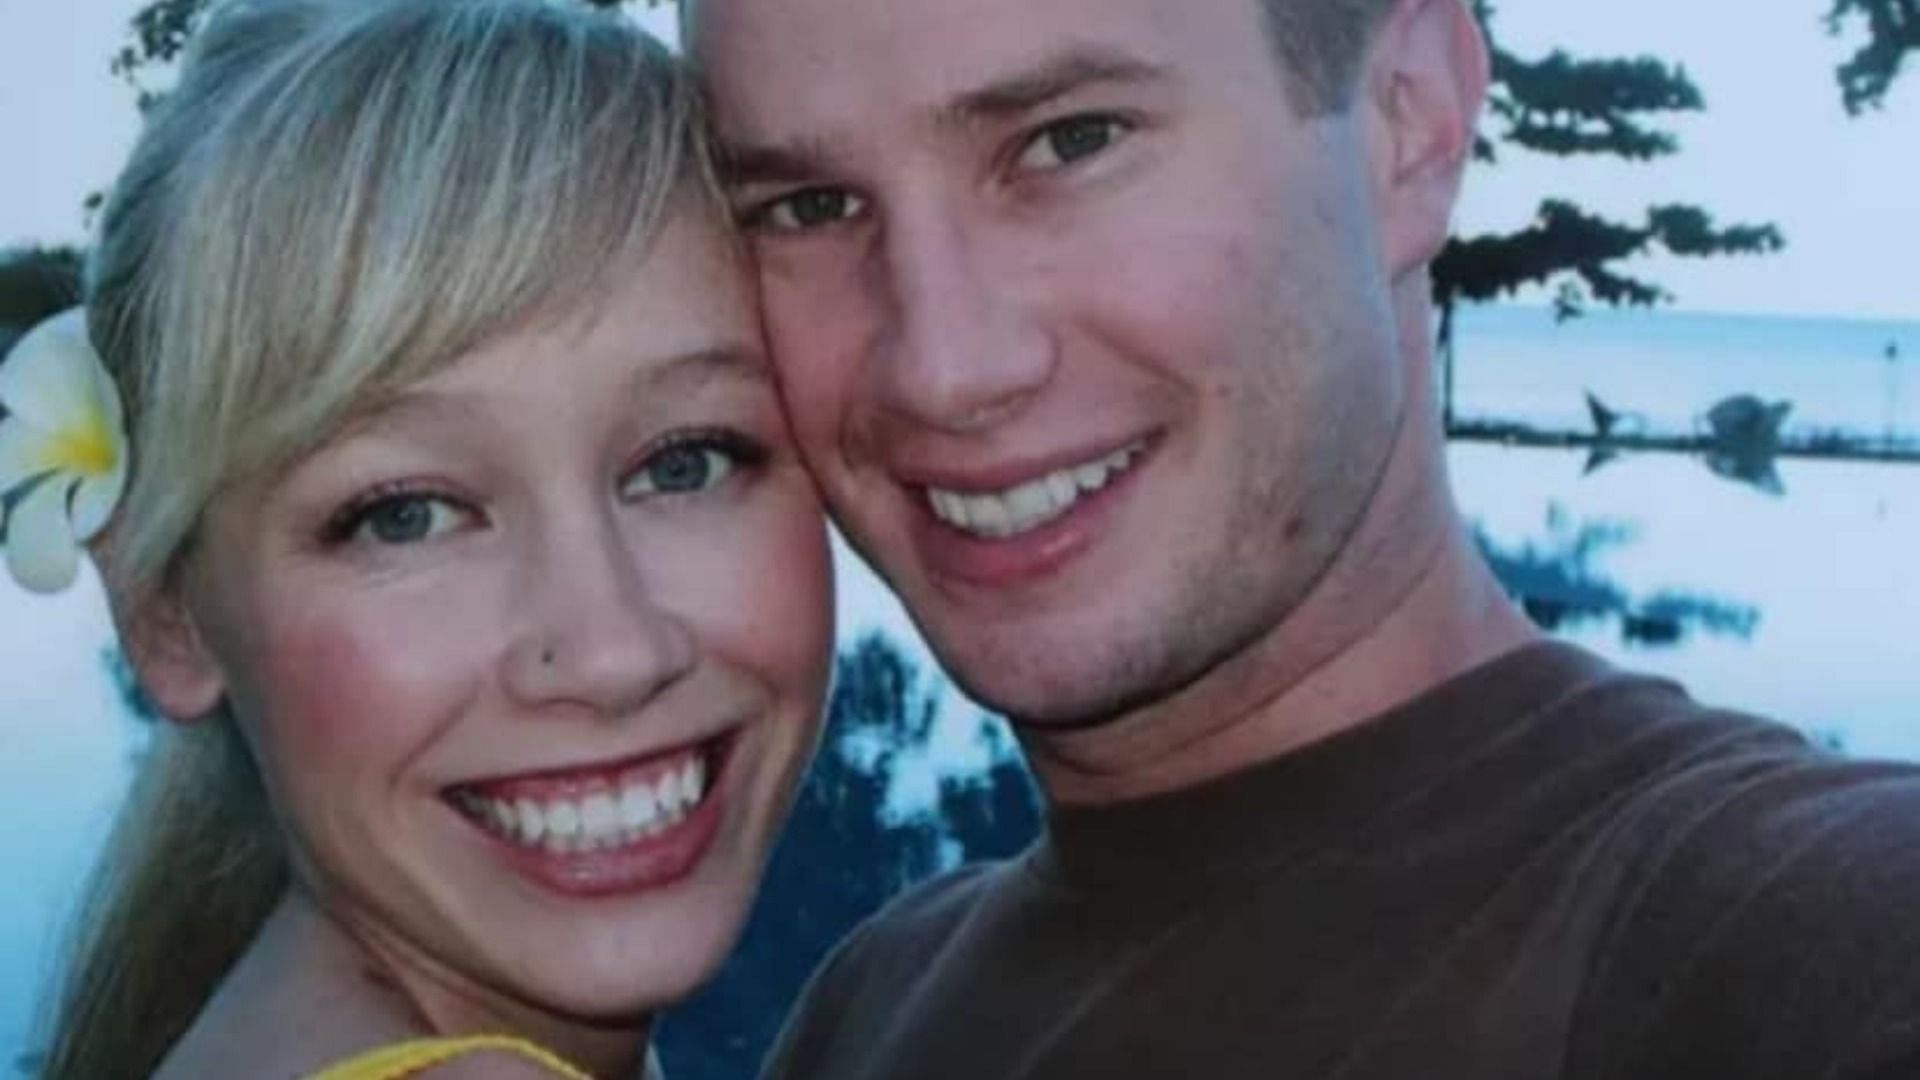 Sherri Papini went missing in November 2016 but was found three weeks later (Image via AndyVermaut/Twitter)